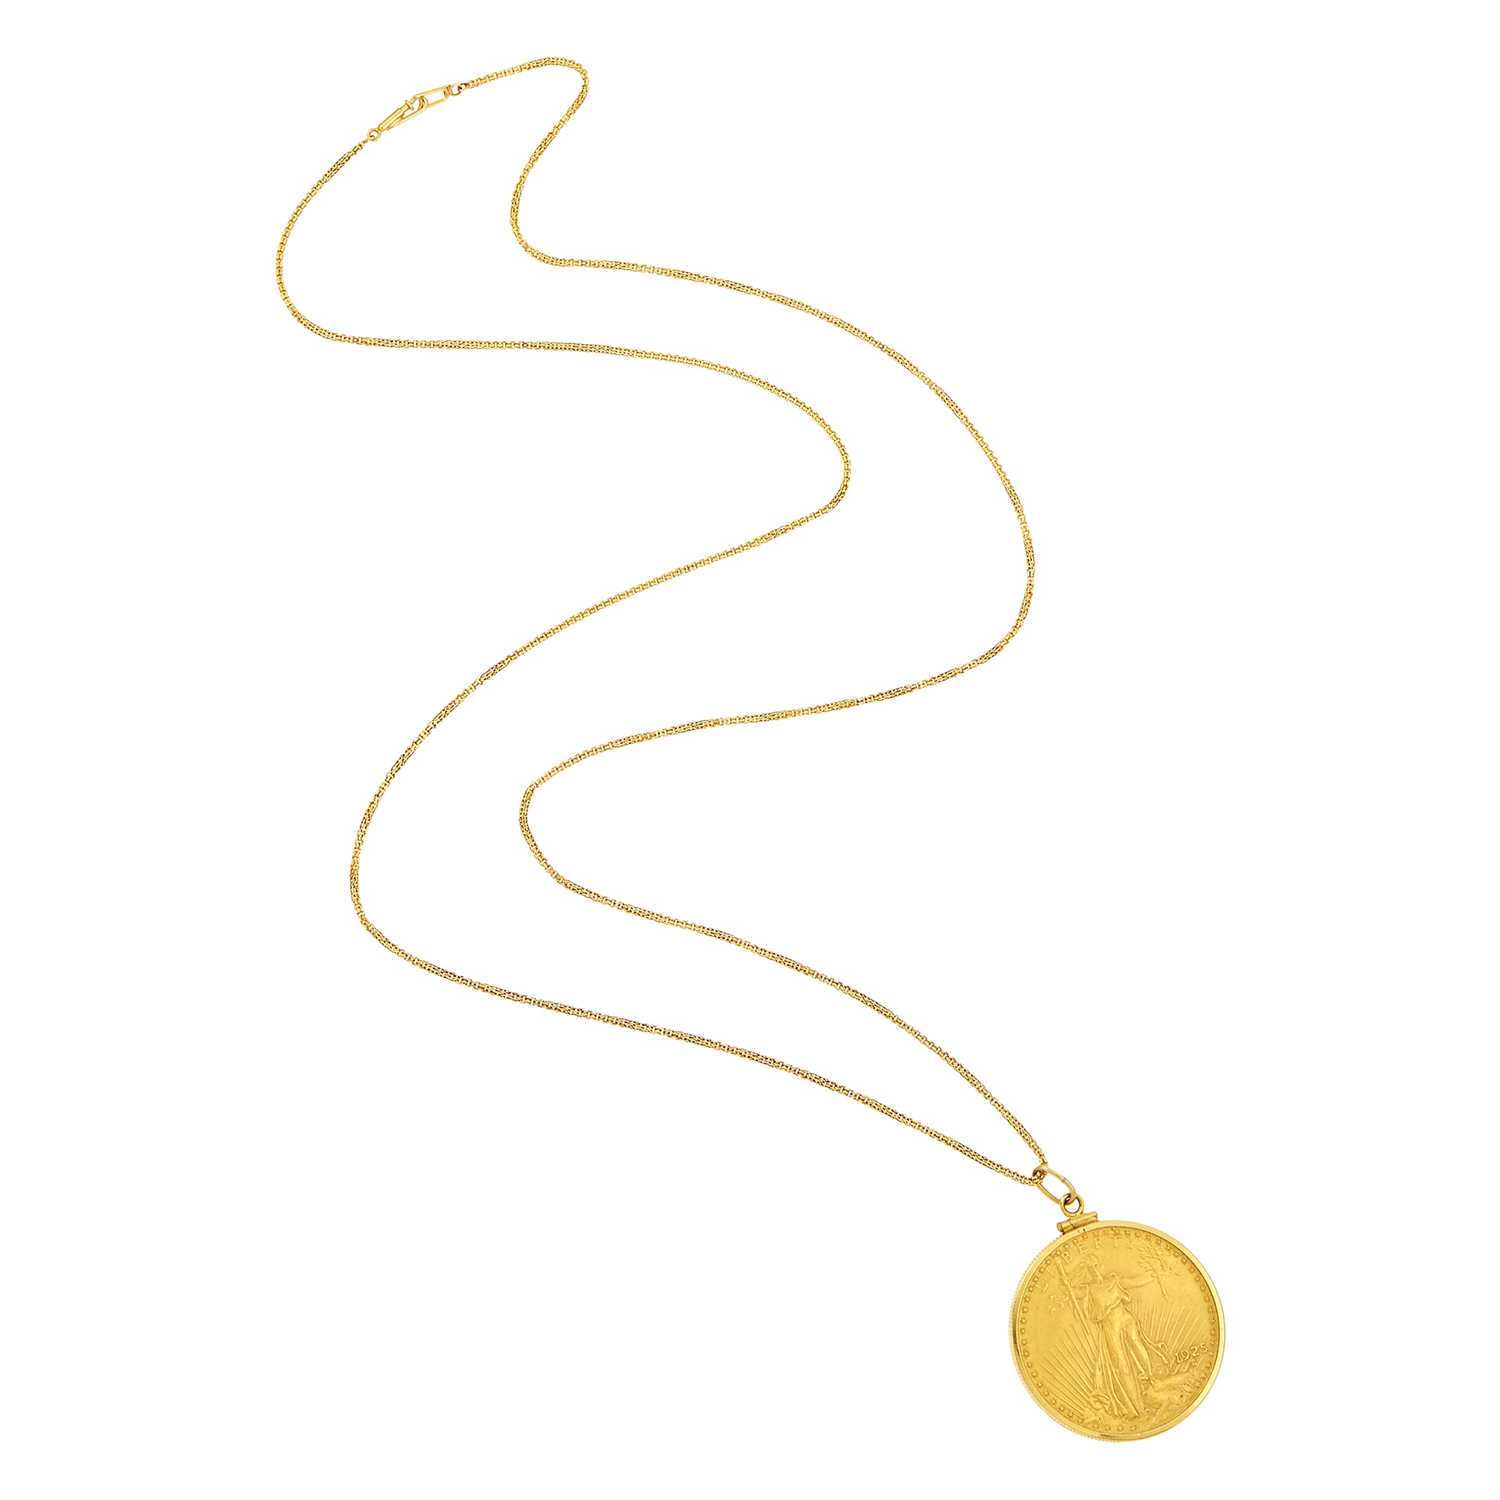 Lot 1107 - Gold United States Coin Pendant with Long Chain Necklace